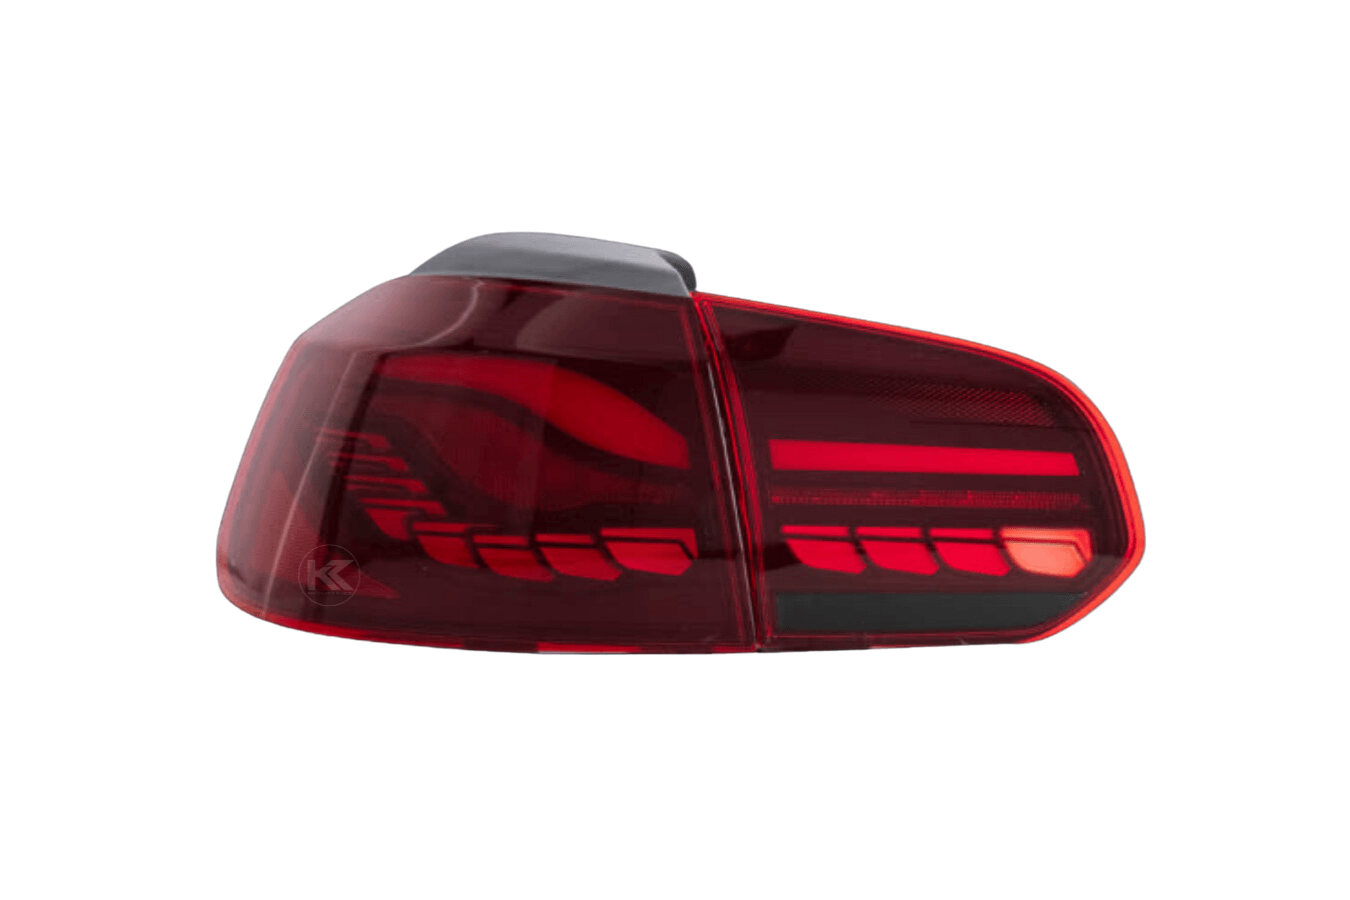 Volkswagen Golf MK6 Smoke and Red Dynamic Lighting OLED Taillights (2008 - 2014) - K2 Industries